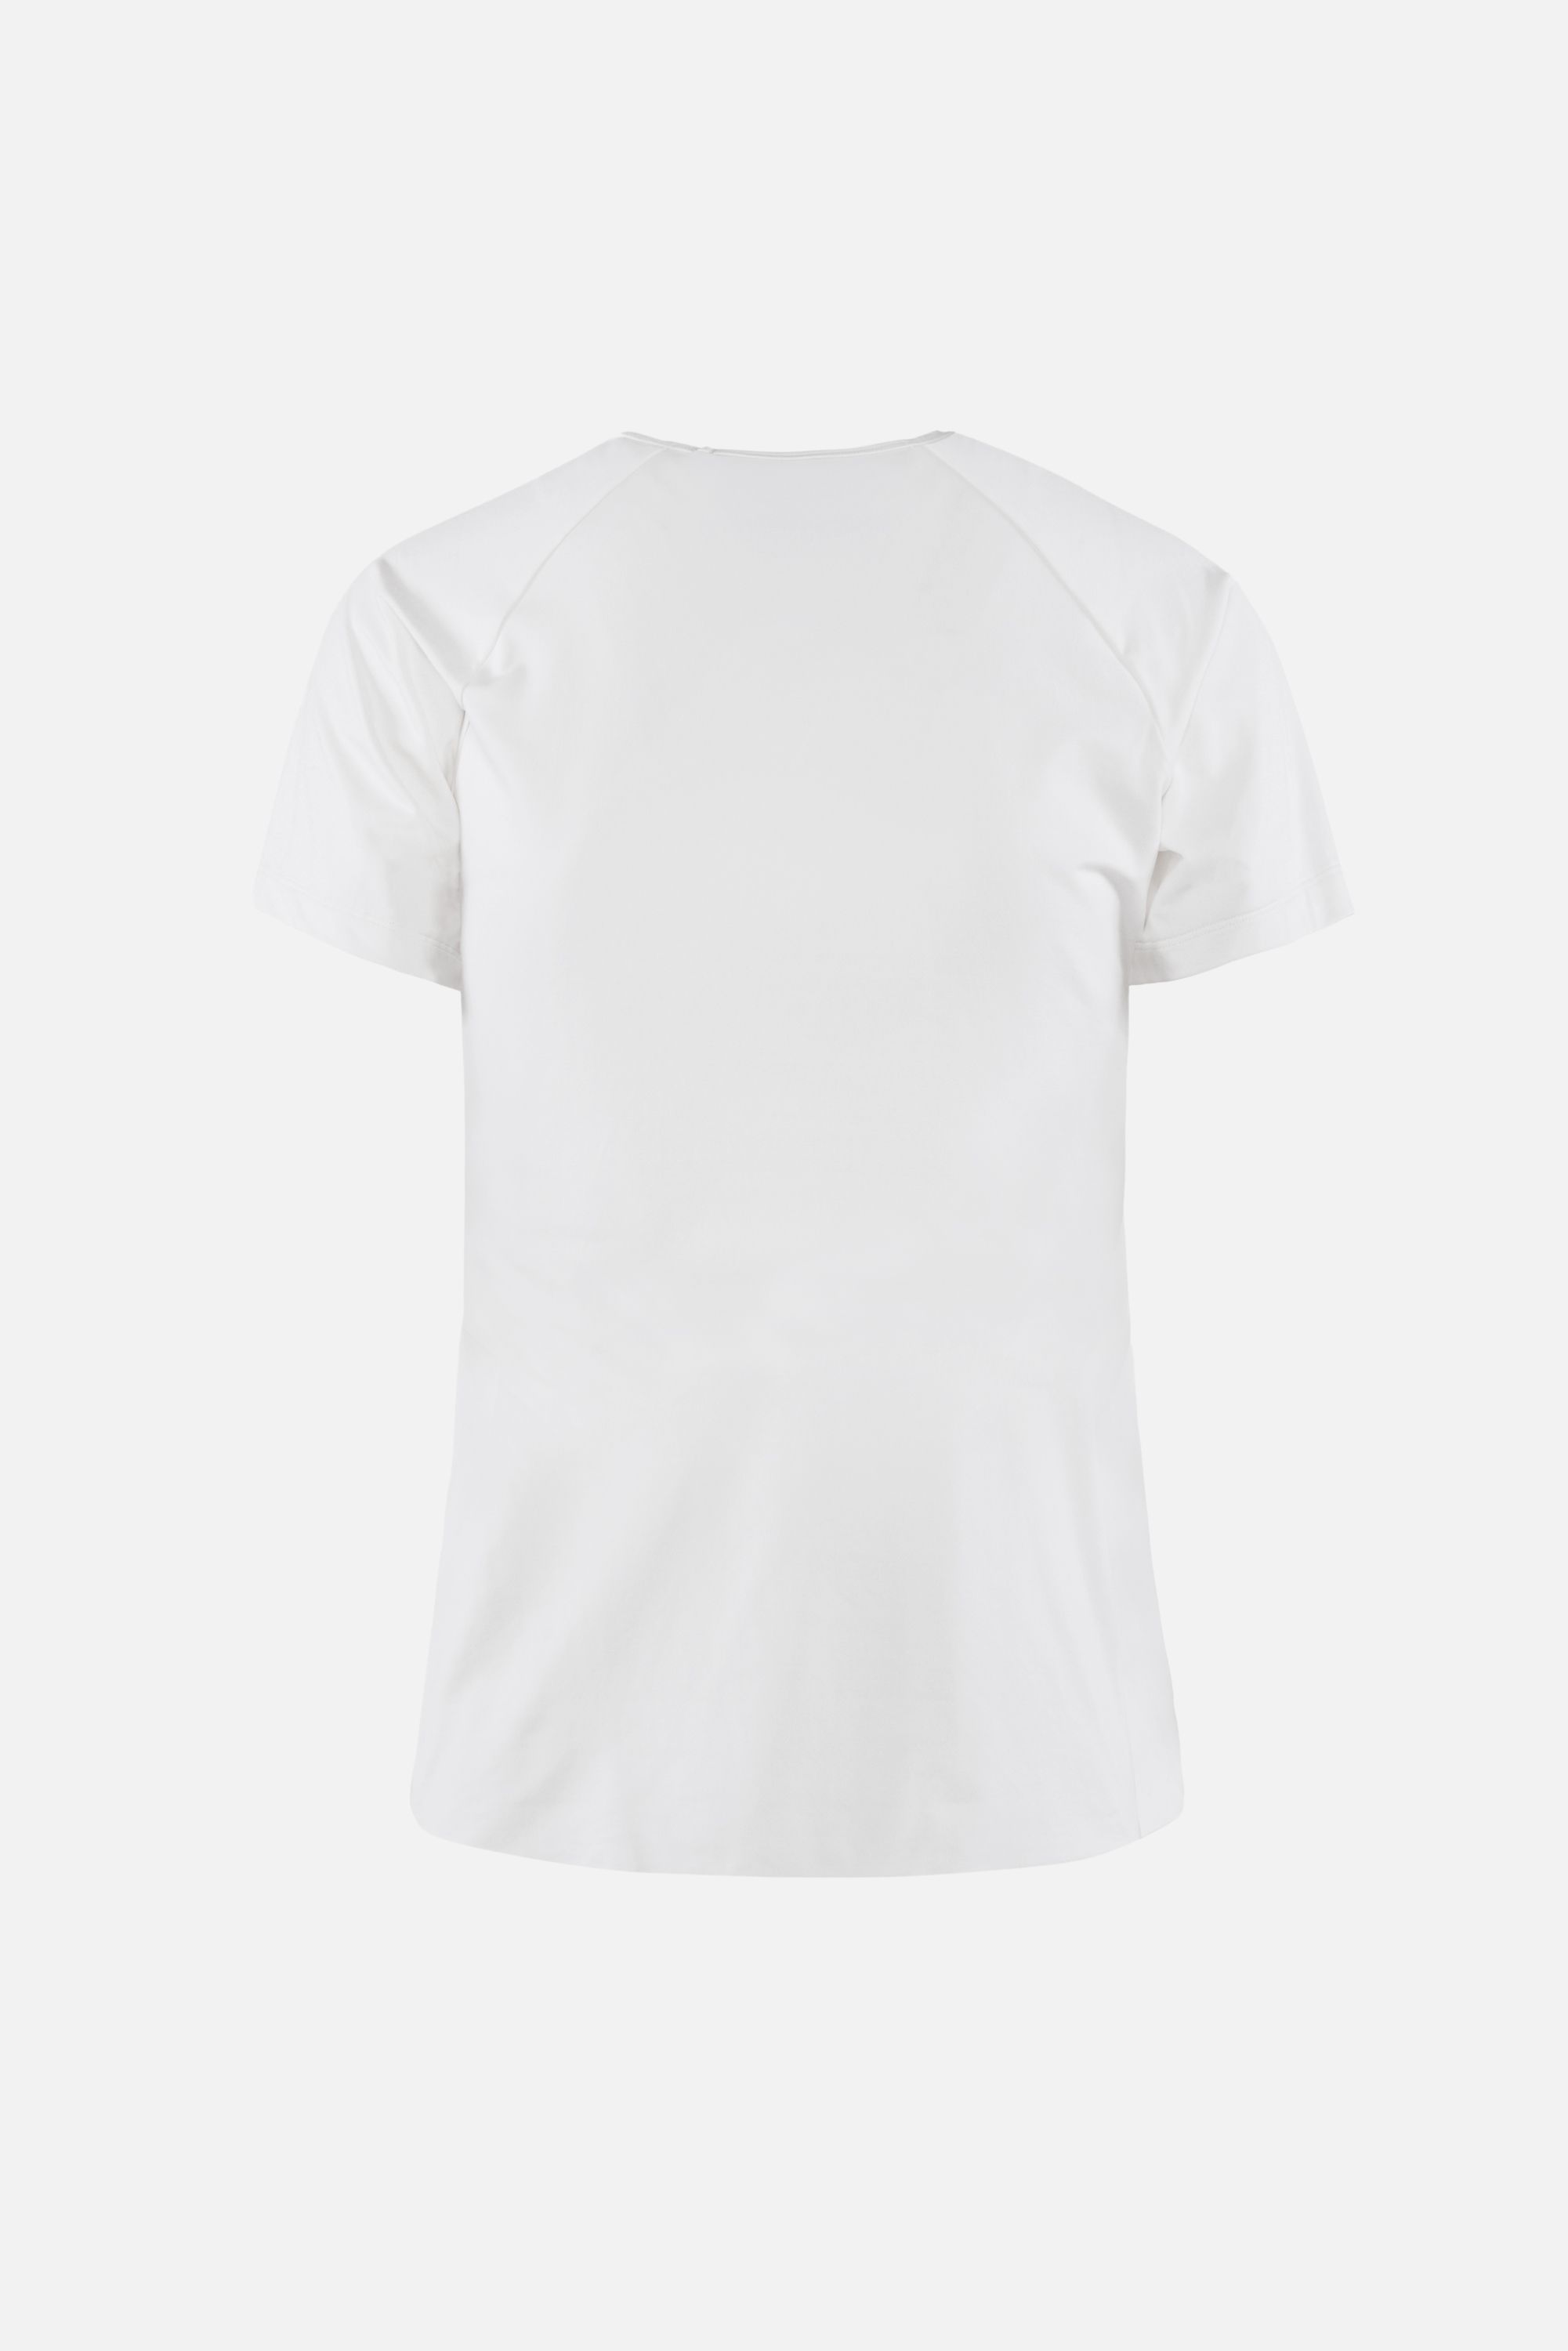 Lightweight Short Sleeve Fitted Tee, White